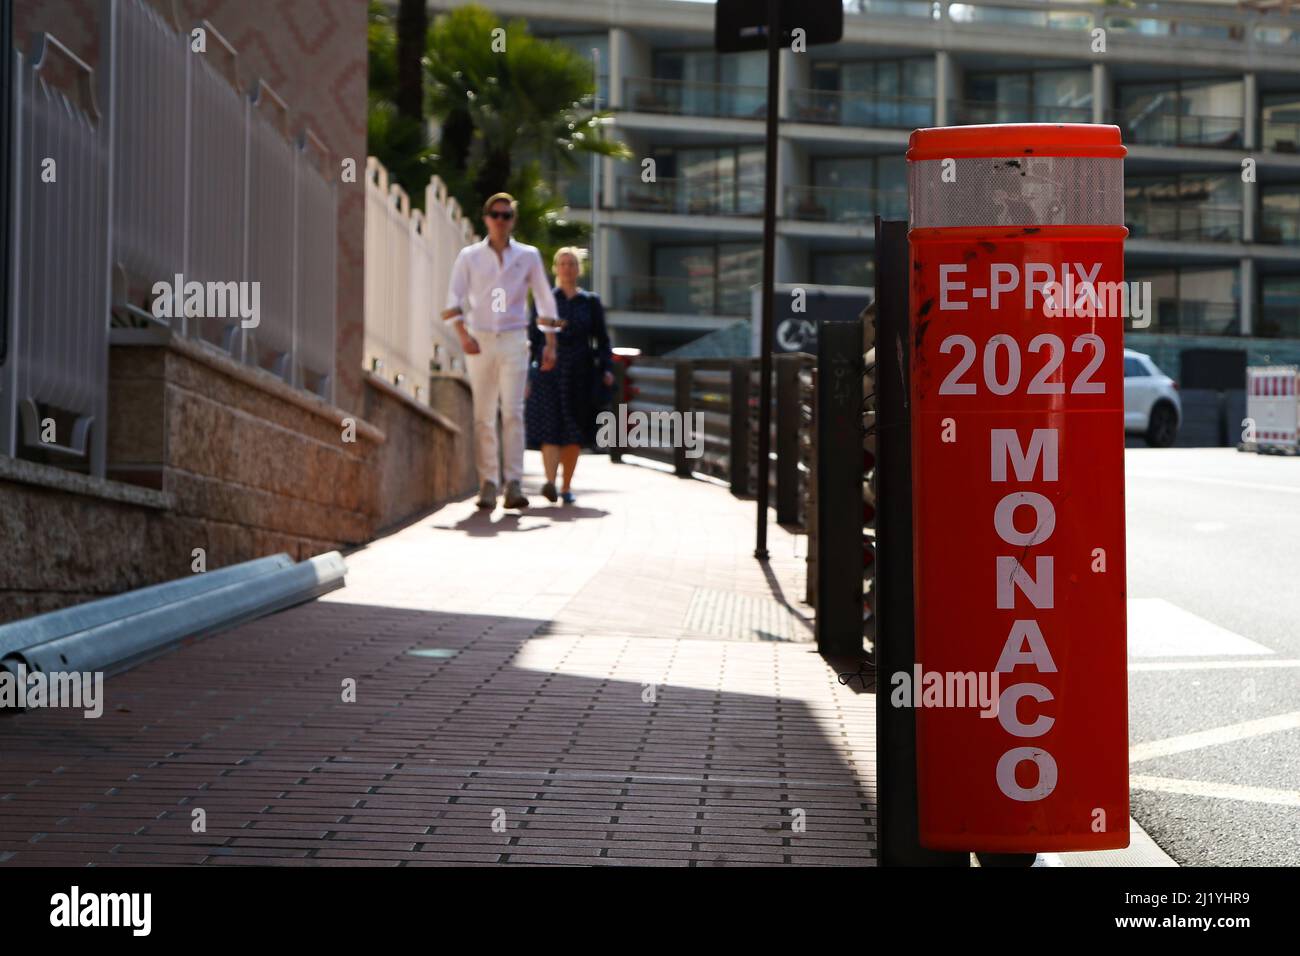 Monte Carlo, Monoco. 28 Mar 2022 - Sign for the Monte Carlo Grand Prix Formula 1 race. The race takes place on 29 May 2022. Credit Dinendra Haria /Alamy Live News Stock Photo